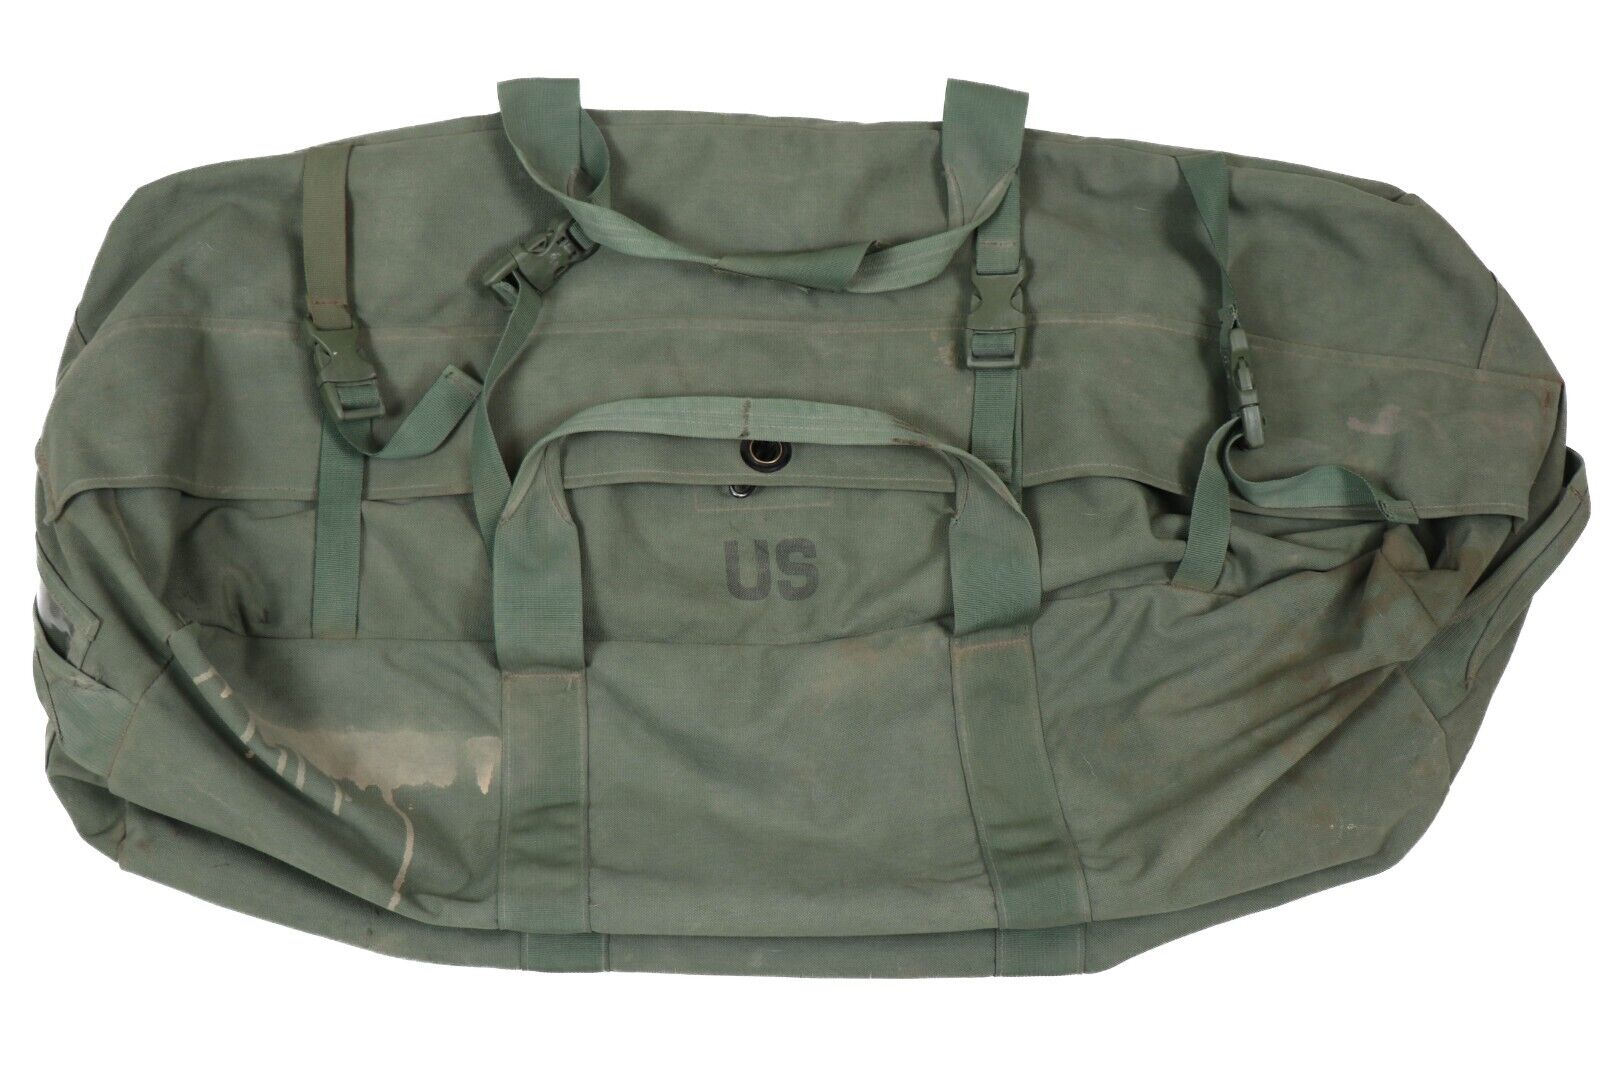 Improved Military Sea Bag US Army Duffle Sack Deployment Pack Green Side Zipper